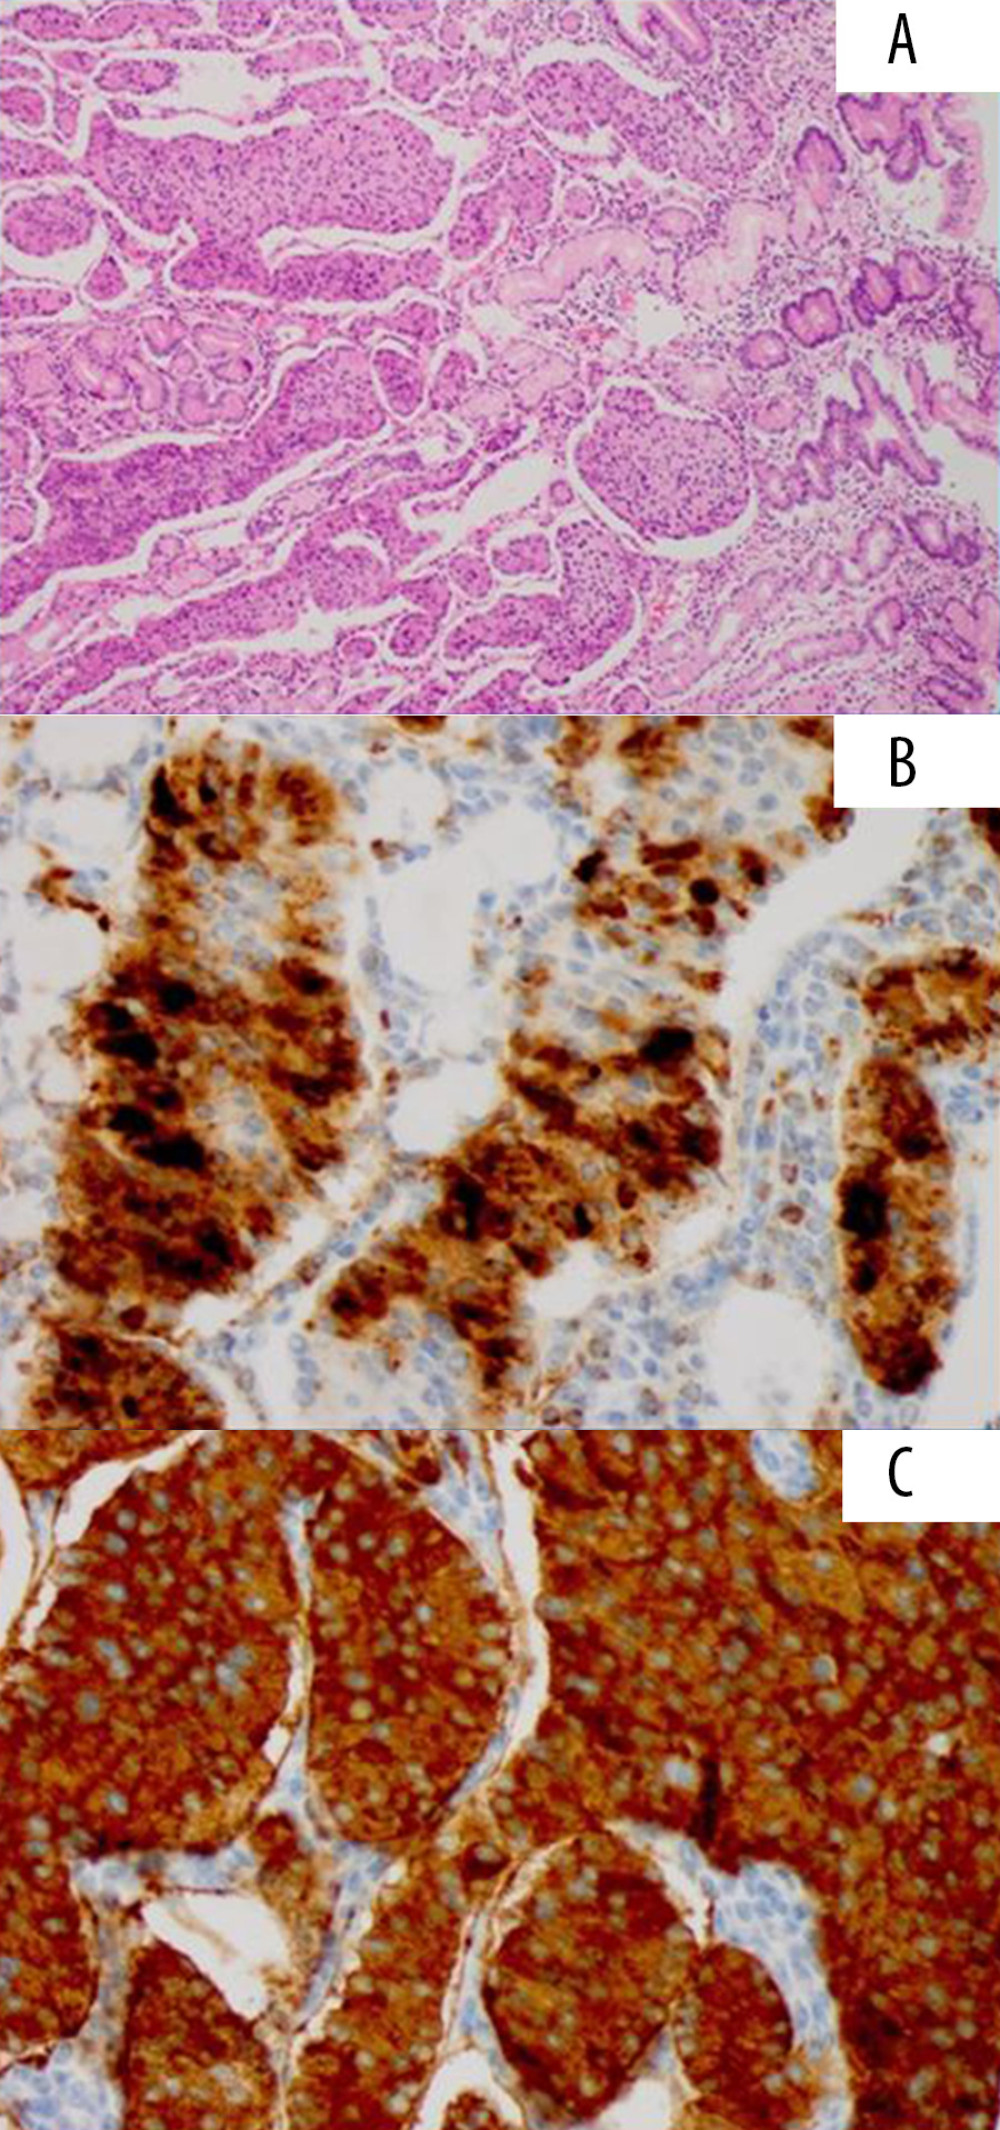 Hematoxylin and eosin staining of tumor invasion in the duodenum (original magnification ×100) (A). On immunohistochemistry, the main tumor cells stained positive with chromogranin A (B) and synaptophysin (original magnification ×200) (C).